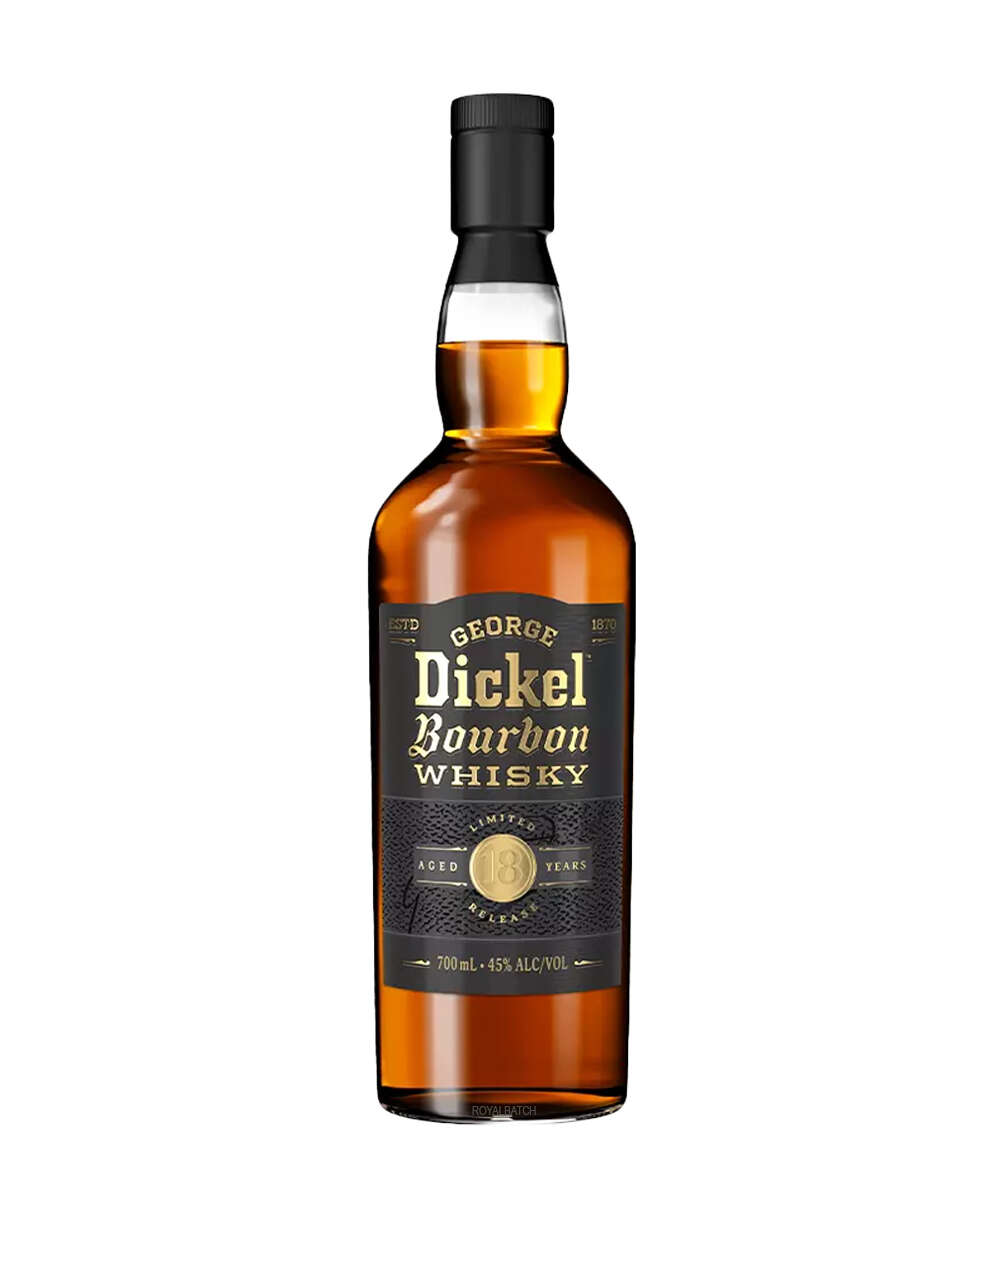 George Dickel 18 Year Old Limited Release Bourbon Whisky